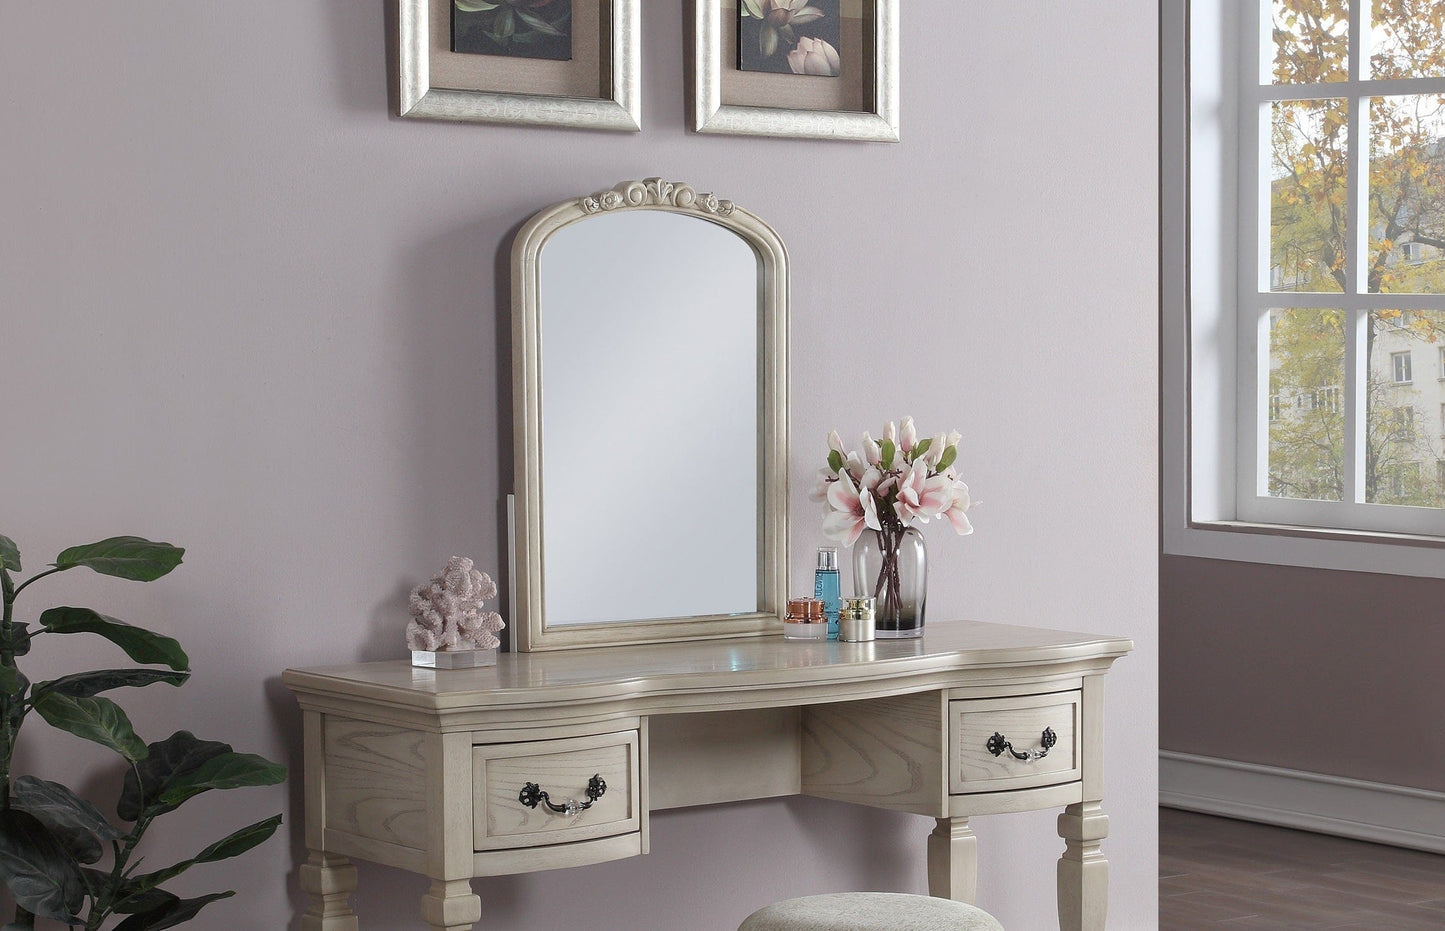 Bedroom Classic Vanity Set Wooden Carved Mirror Stool Drawers Antique White